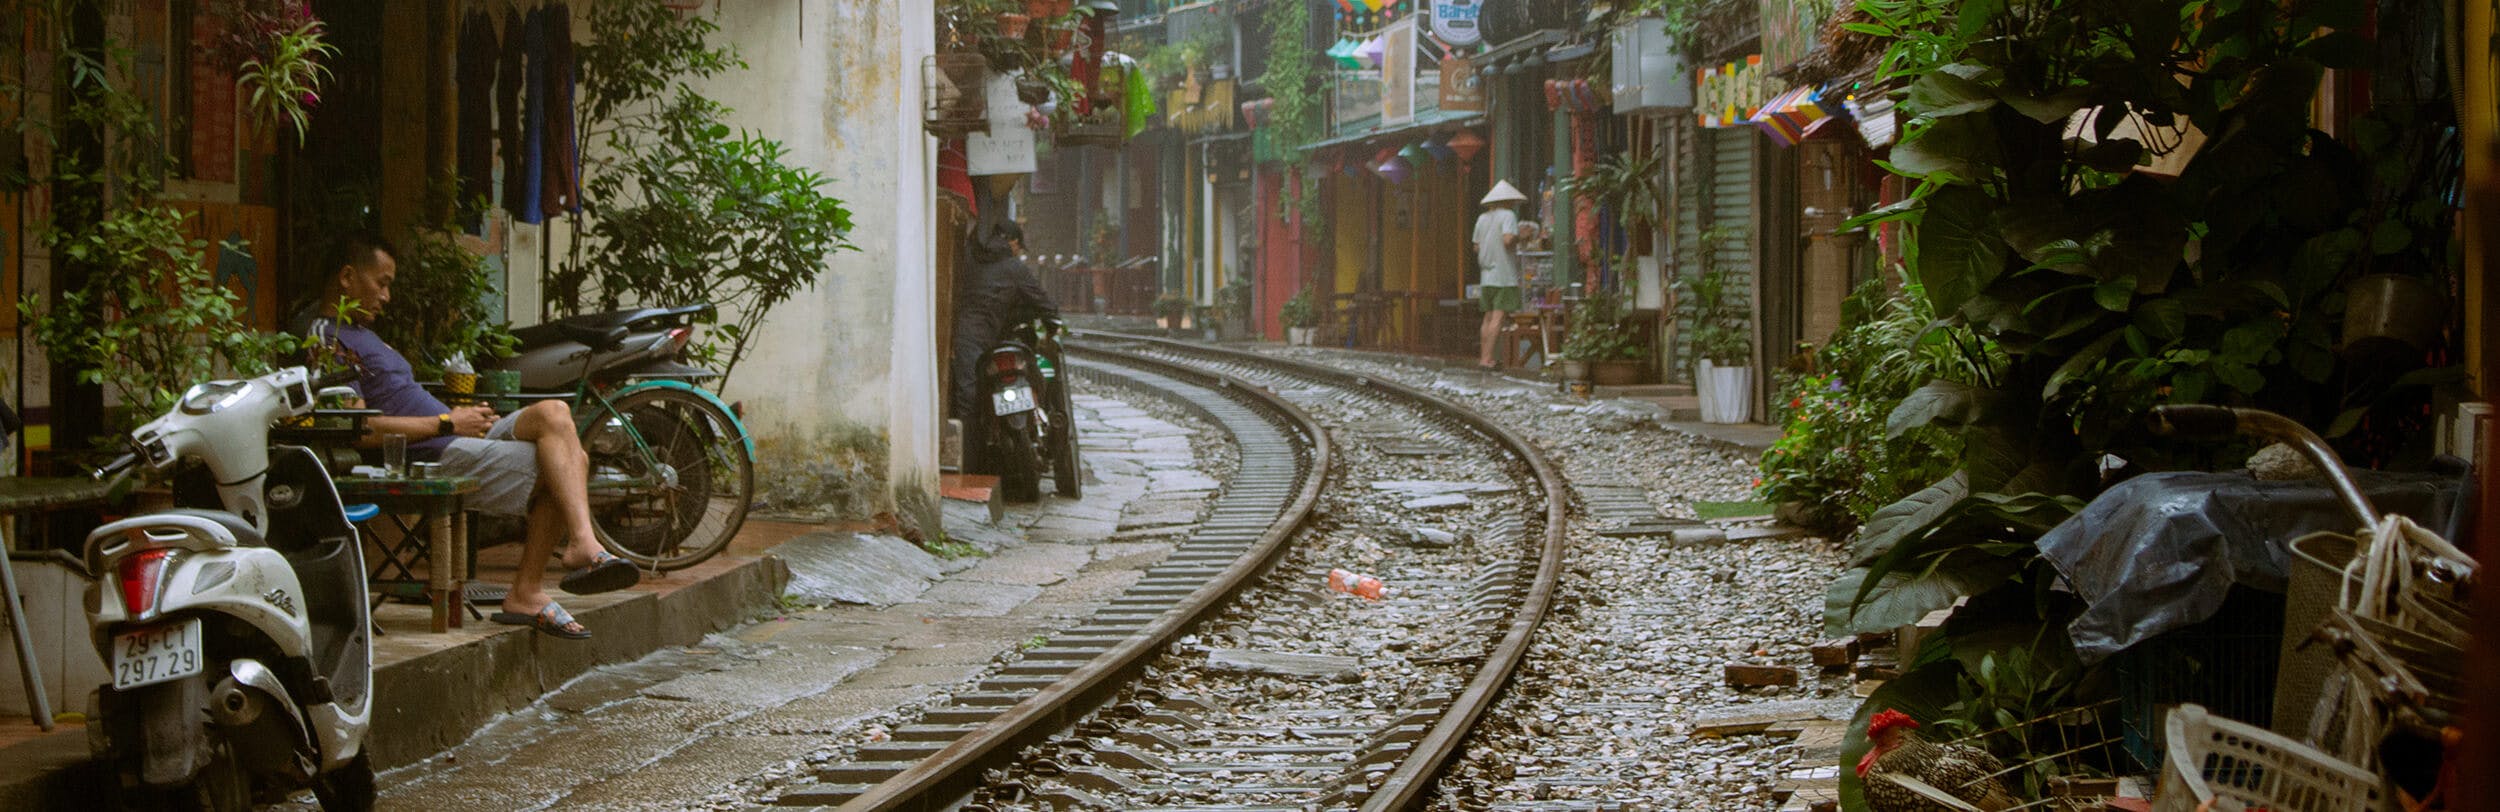 Picture of Train Street, Hanoi (Vietnam). There is a slight drizzle in the air. On the left a man is drinking some coffee, or tea; a little bit further up, another person is trying to cover their scooter from the incoming rain. There is a lot of green plants all around 